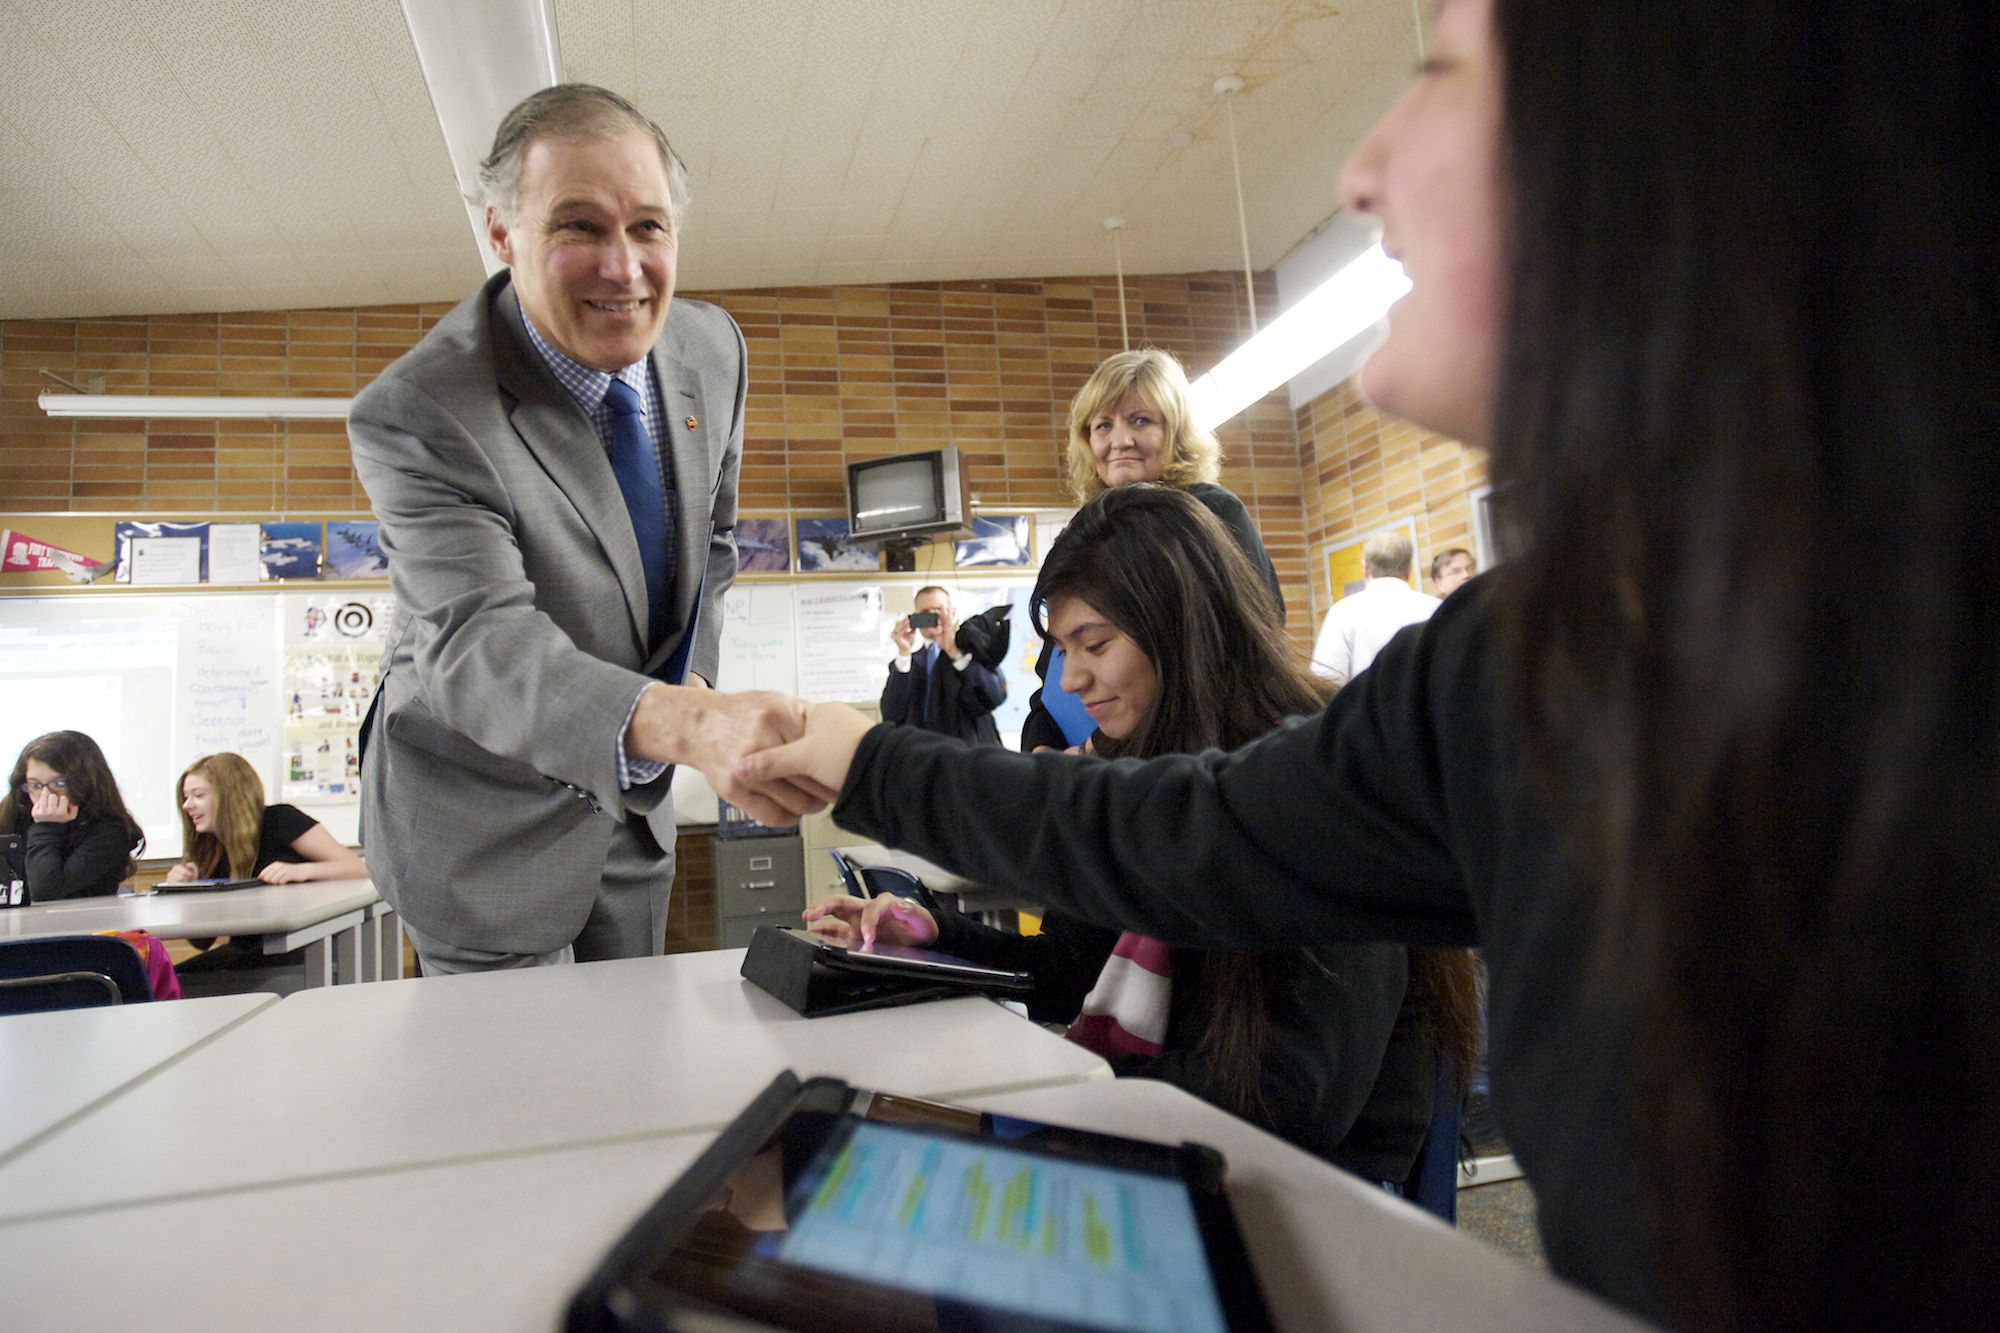 Gov. Jay Inslee, left, and his wife, Trudi, greet McLoughlin Middle School students Lizbeth Martinez, seated at center, and Karol Hoyos, both 14, in Bill Sixour's U.S. history class on Wednesday. They were using tablets to learn about the Underground Railroad.